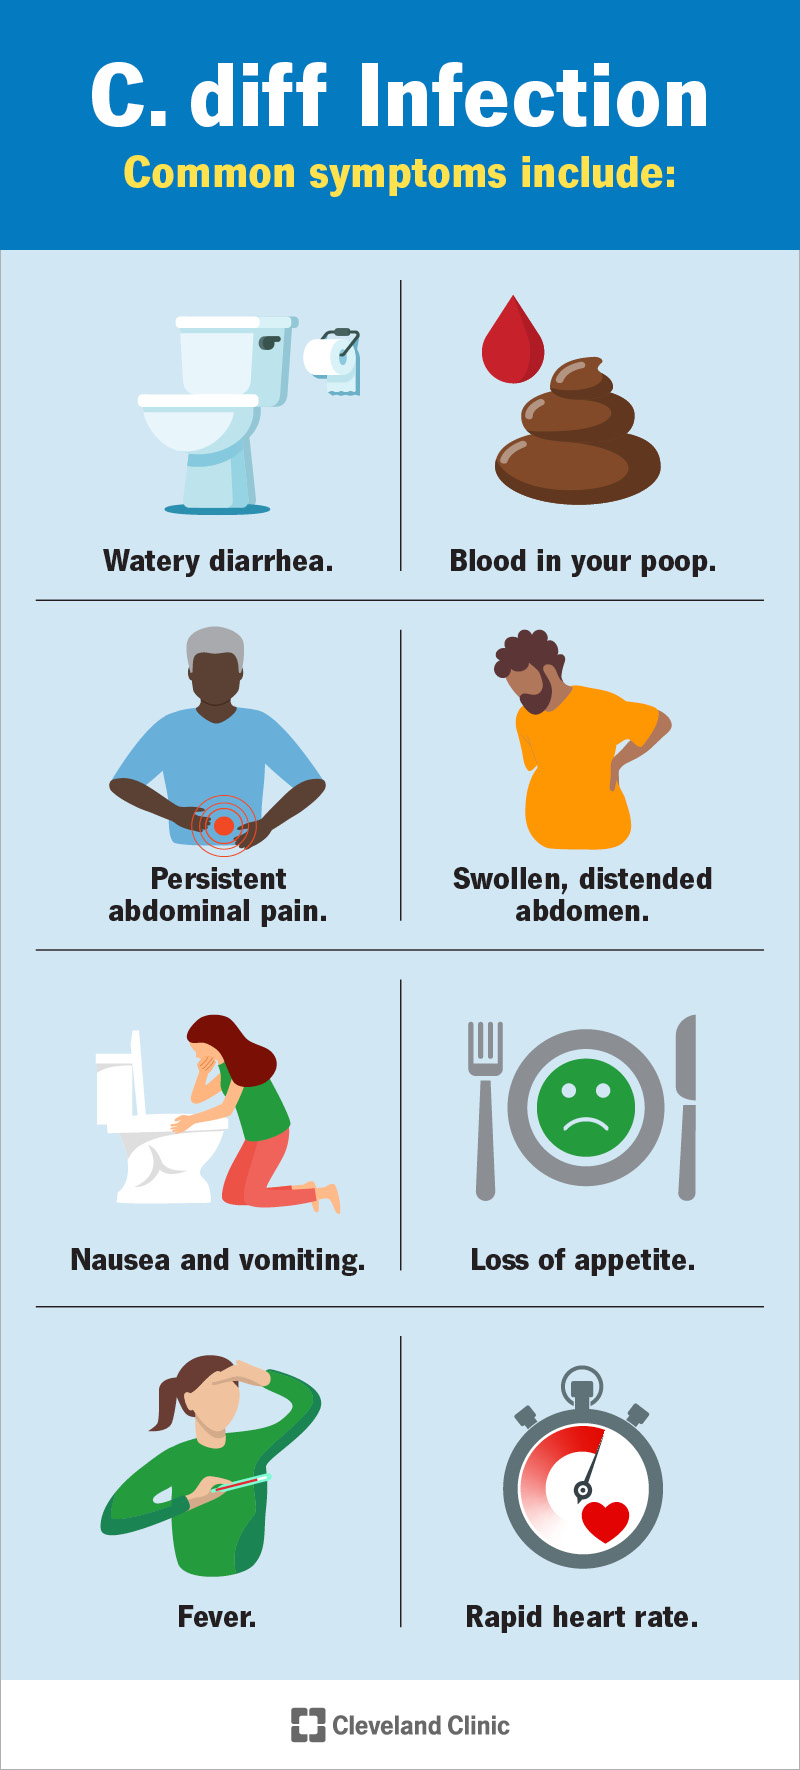 C. diff infection causes watery diarrhea, sometimes bloody.